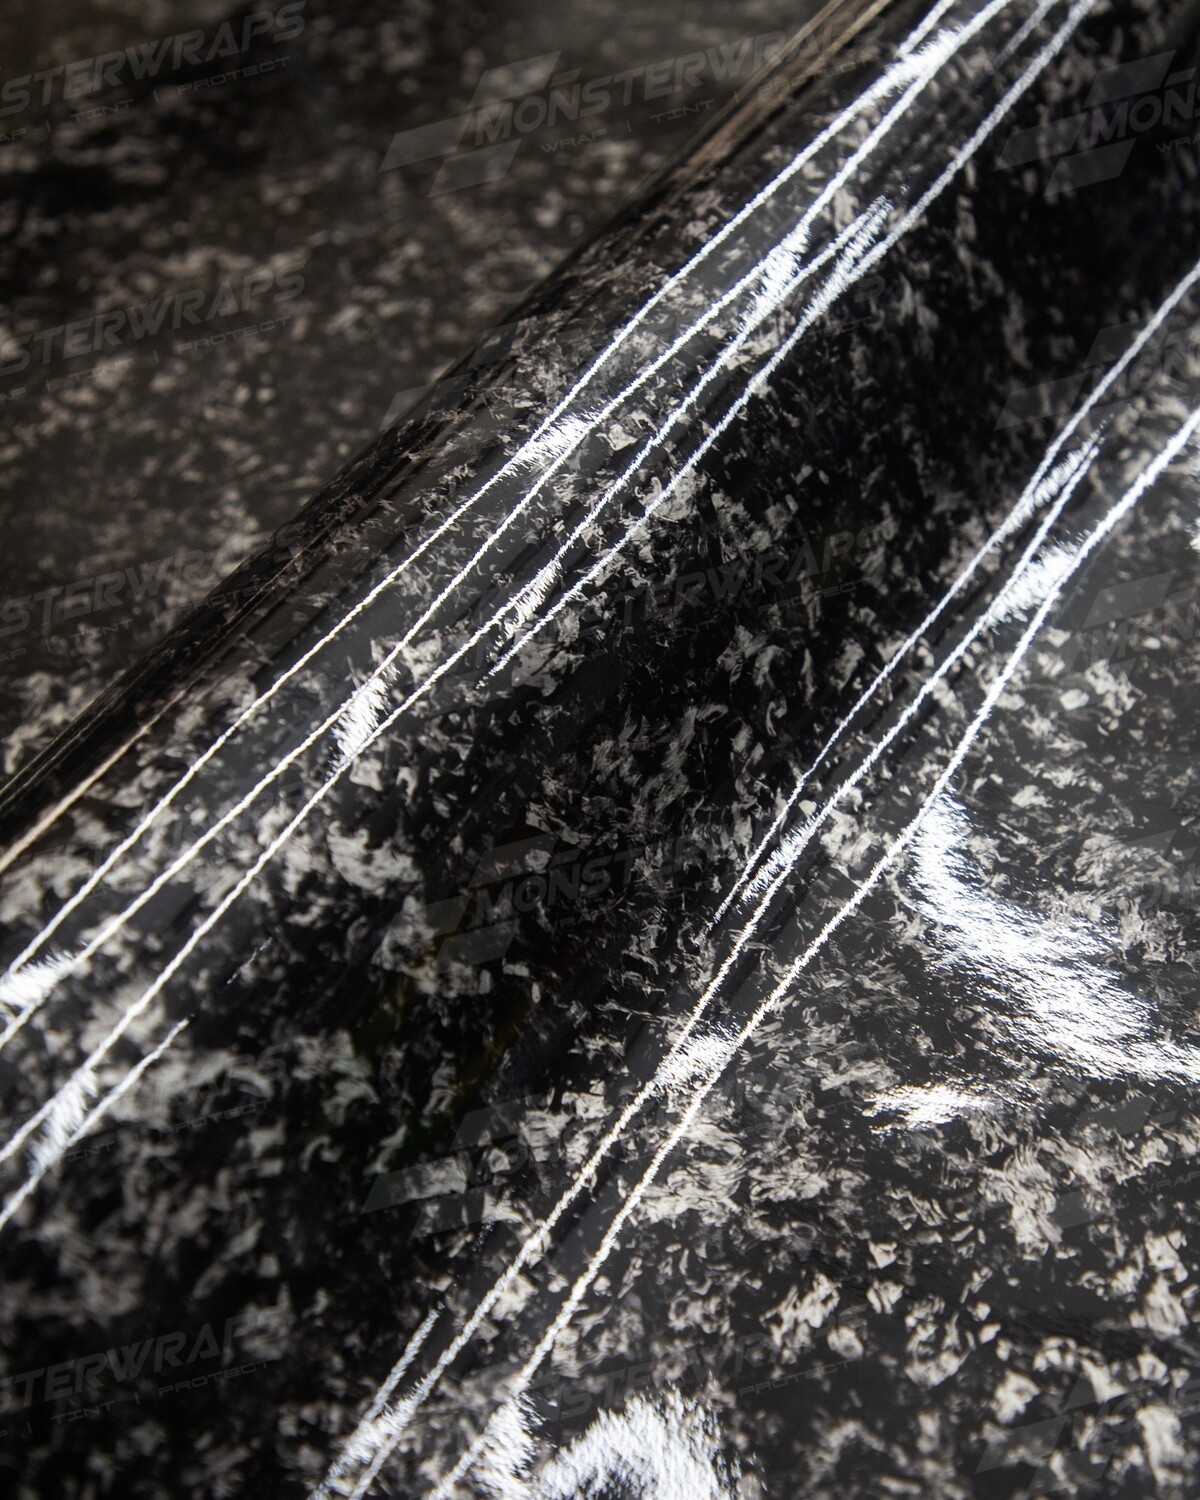 OFF-CUT: Gloss Forged Carbon (700 x 1500mm)